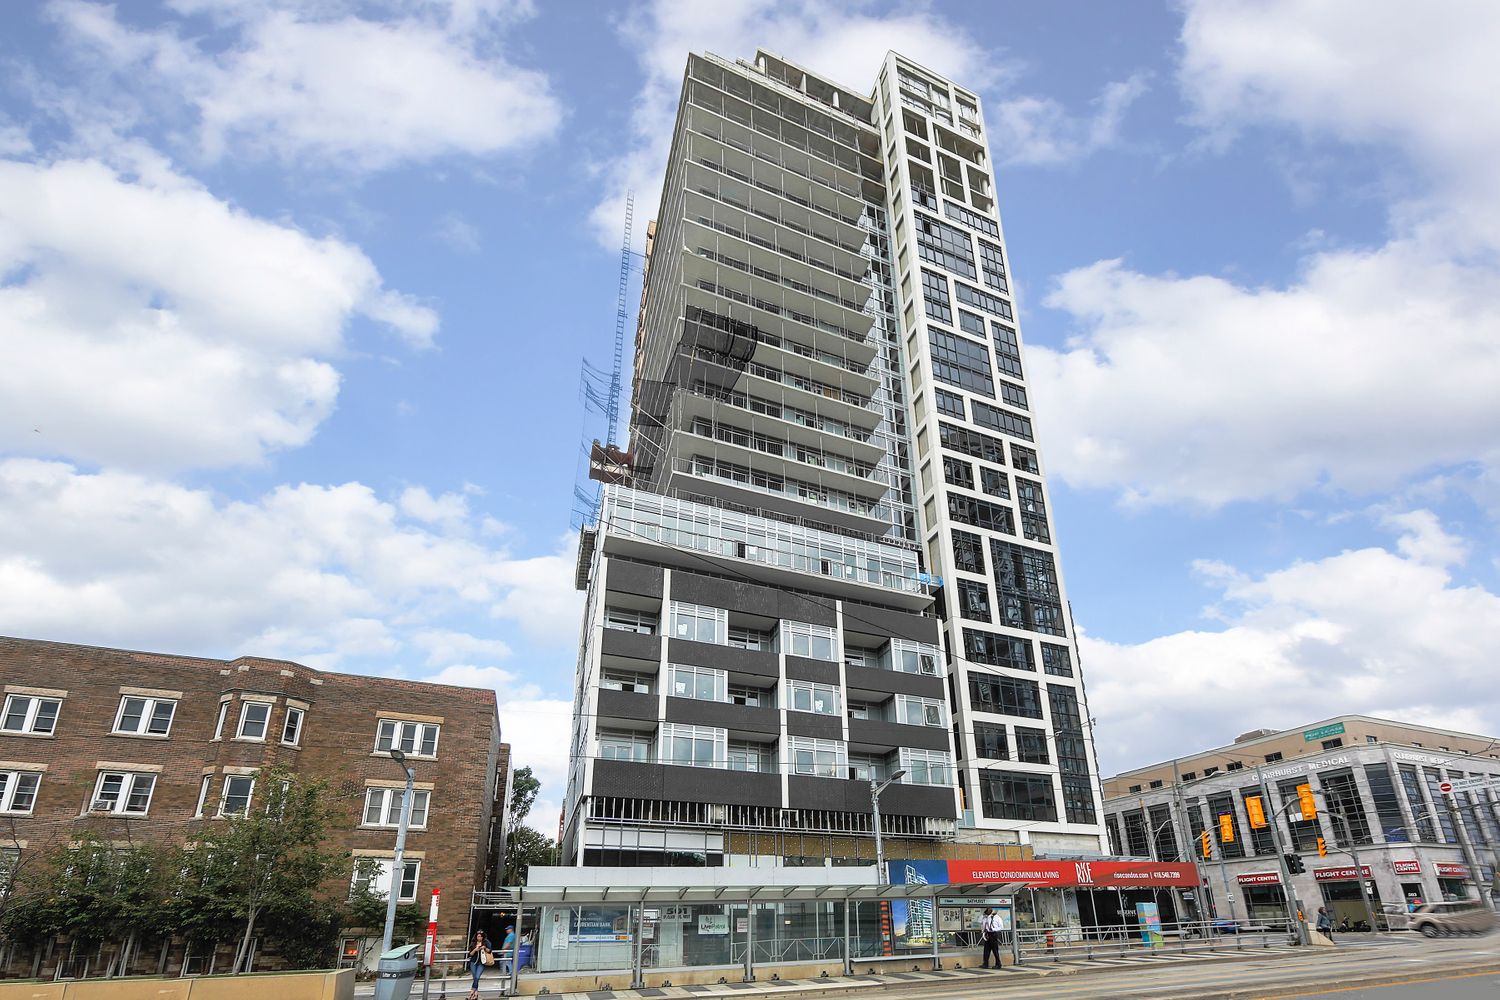 501 St Clair Avenue W. Rise Condos is located in  Midtown, Toronto - image #2 of 2